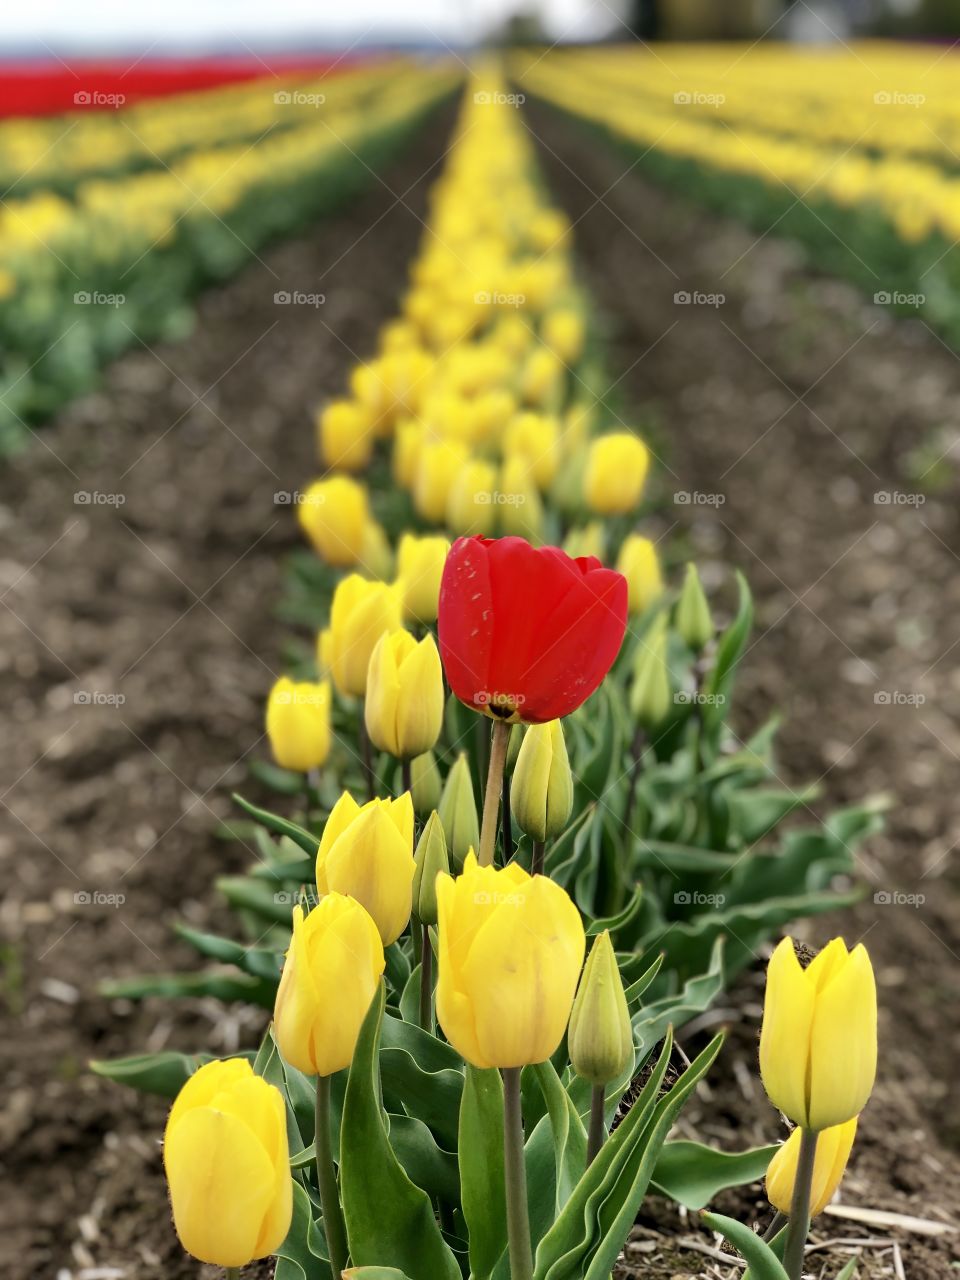 Foap Mission Color Love! One Single Red Tulip in a Field of Yellow Tulips Close Shot!